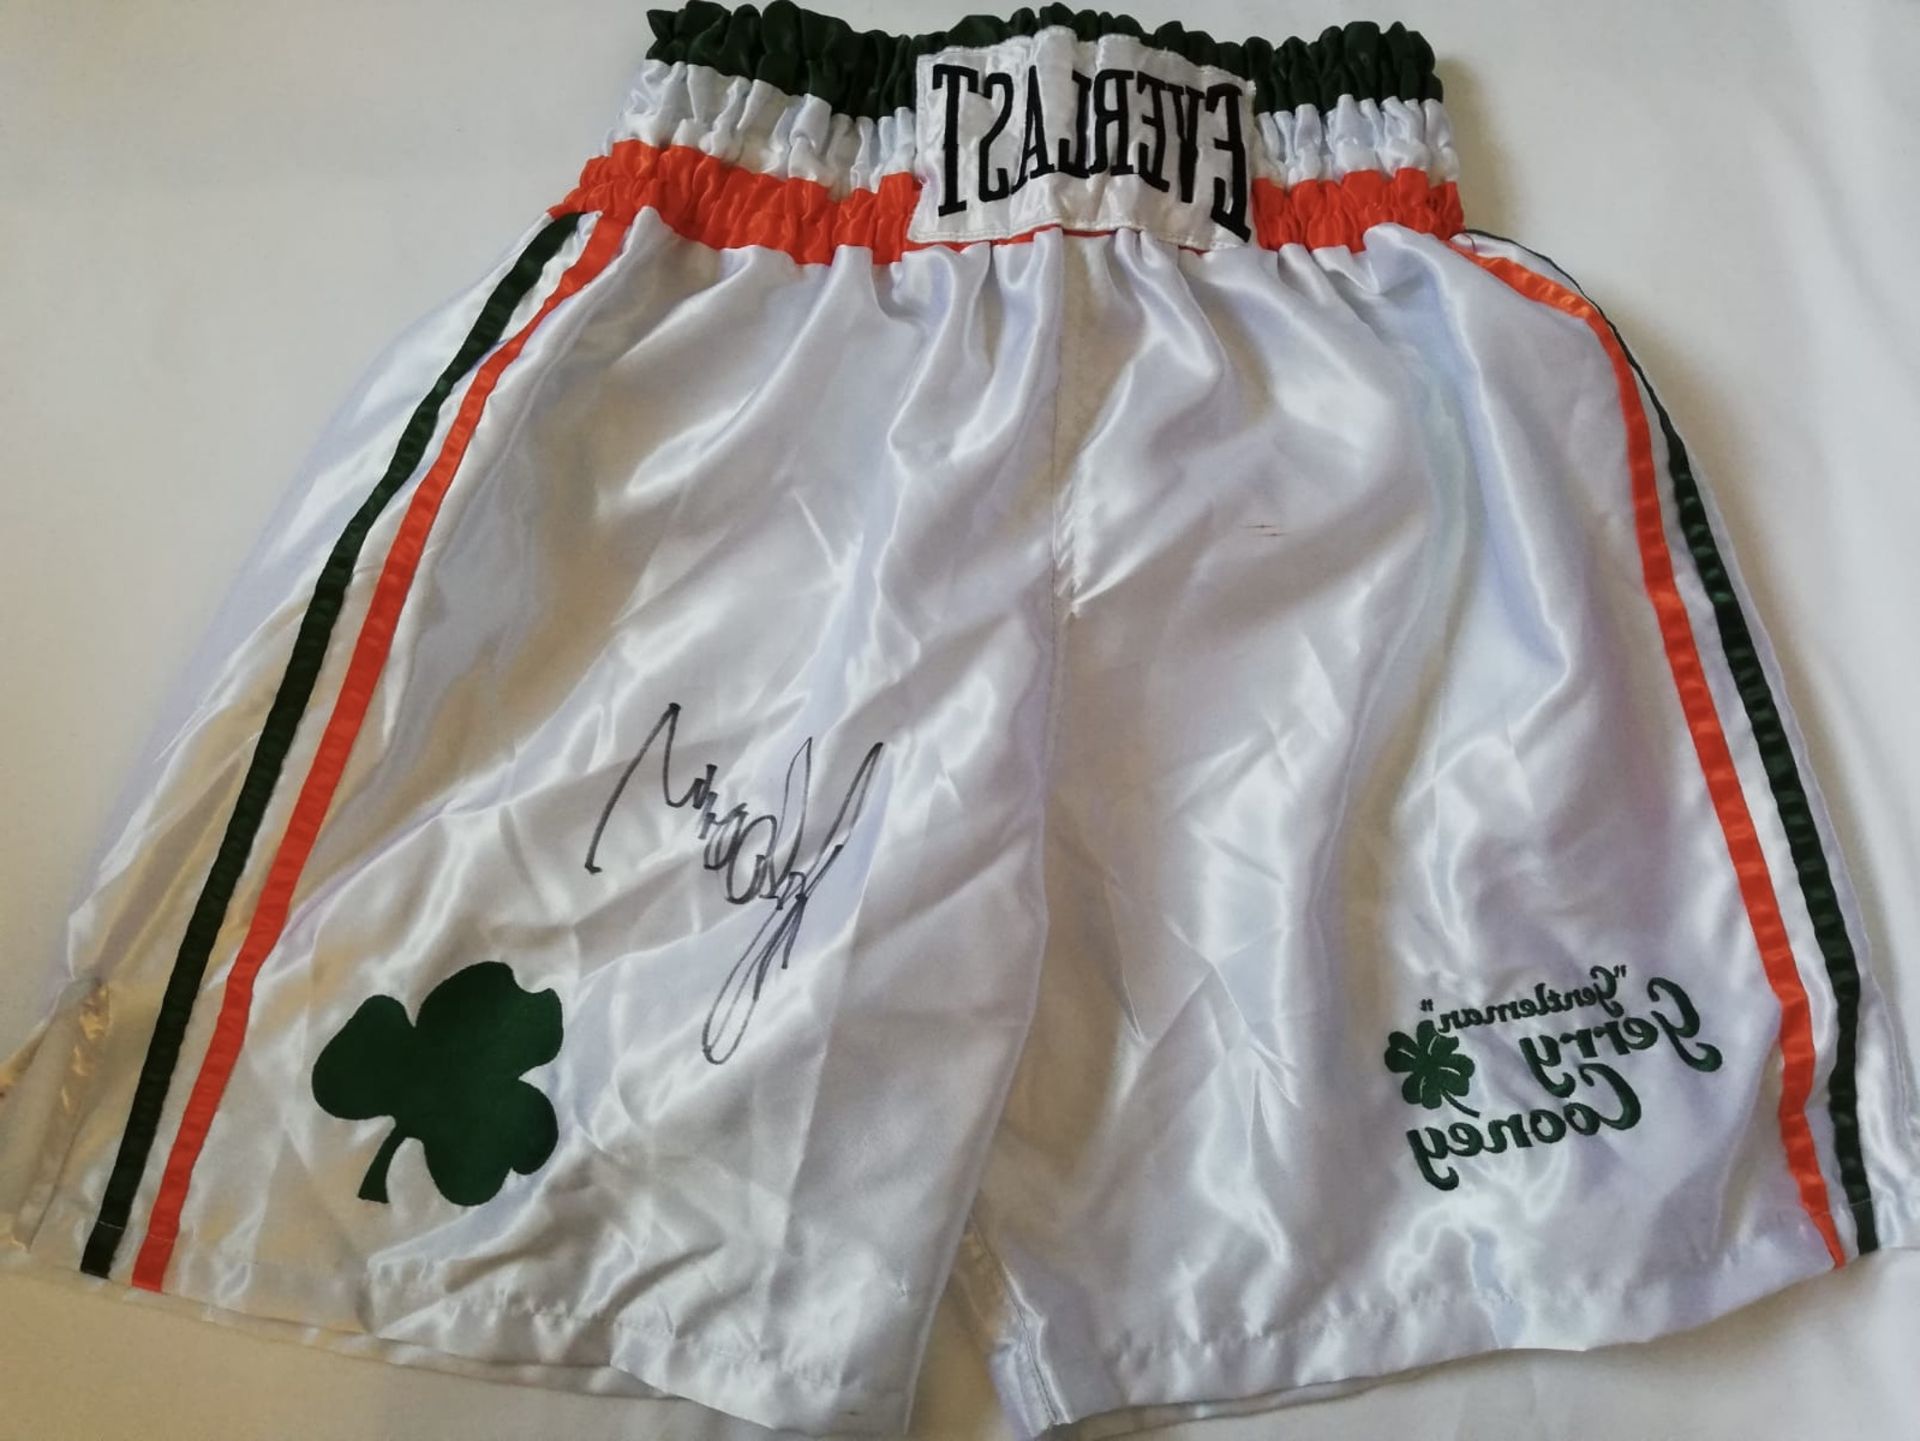 Gerry Cooney Signed Boxing Shorts Supplied with Certificate Of Authenticity